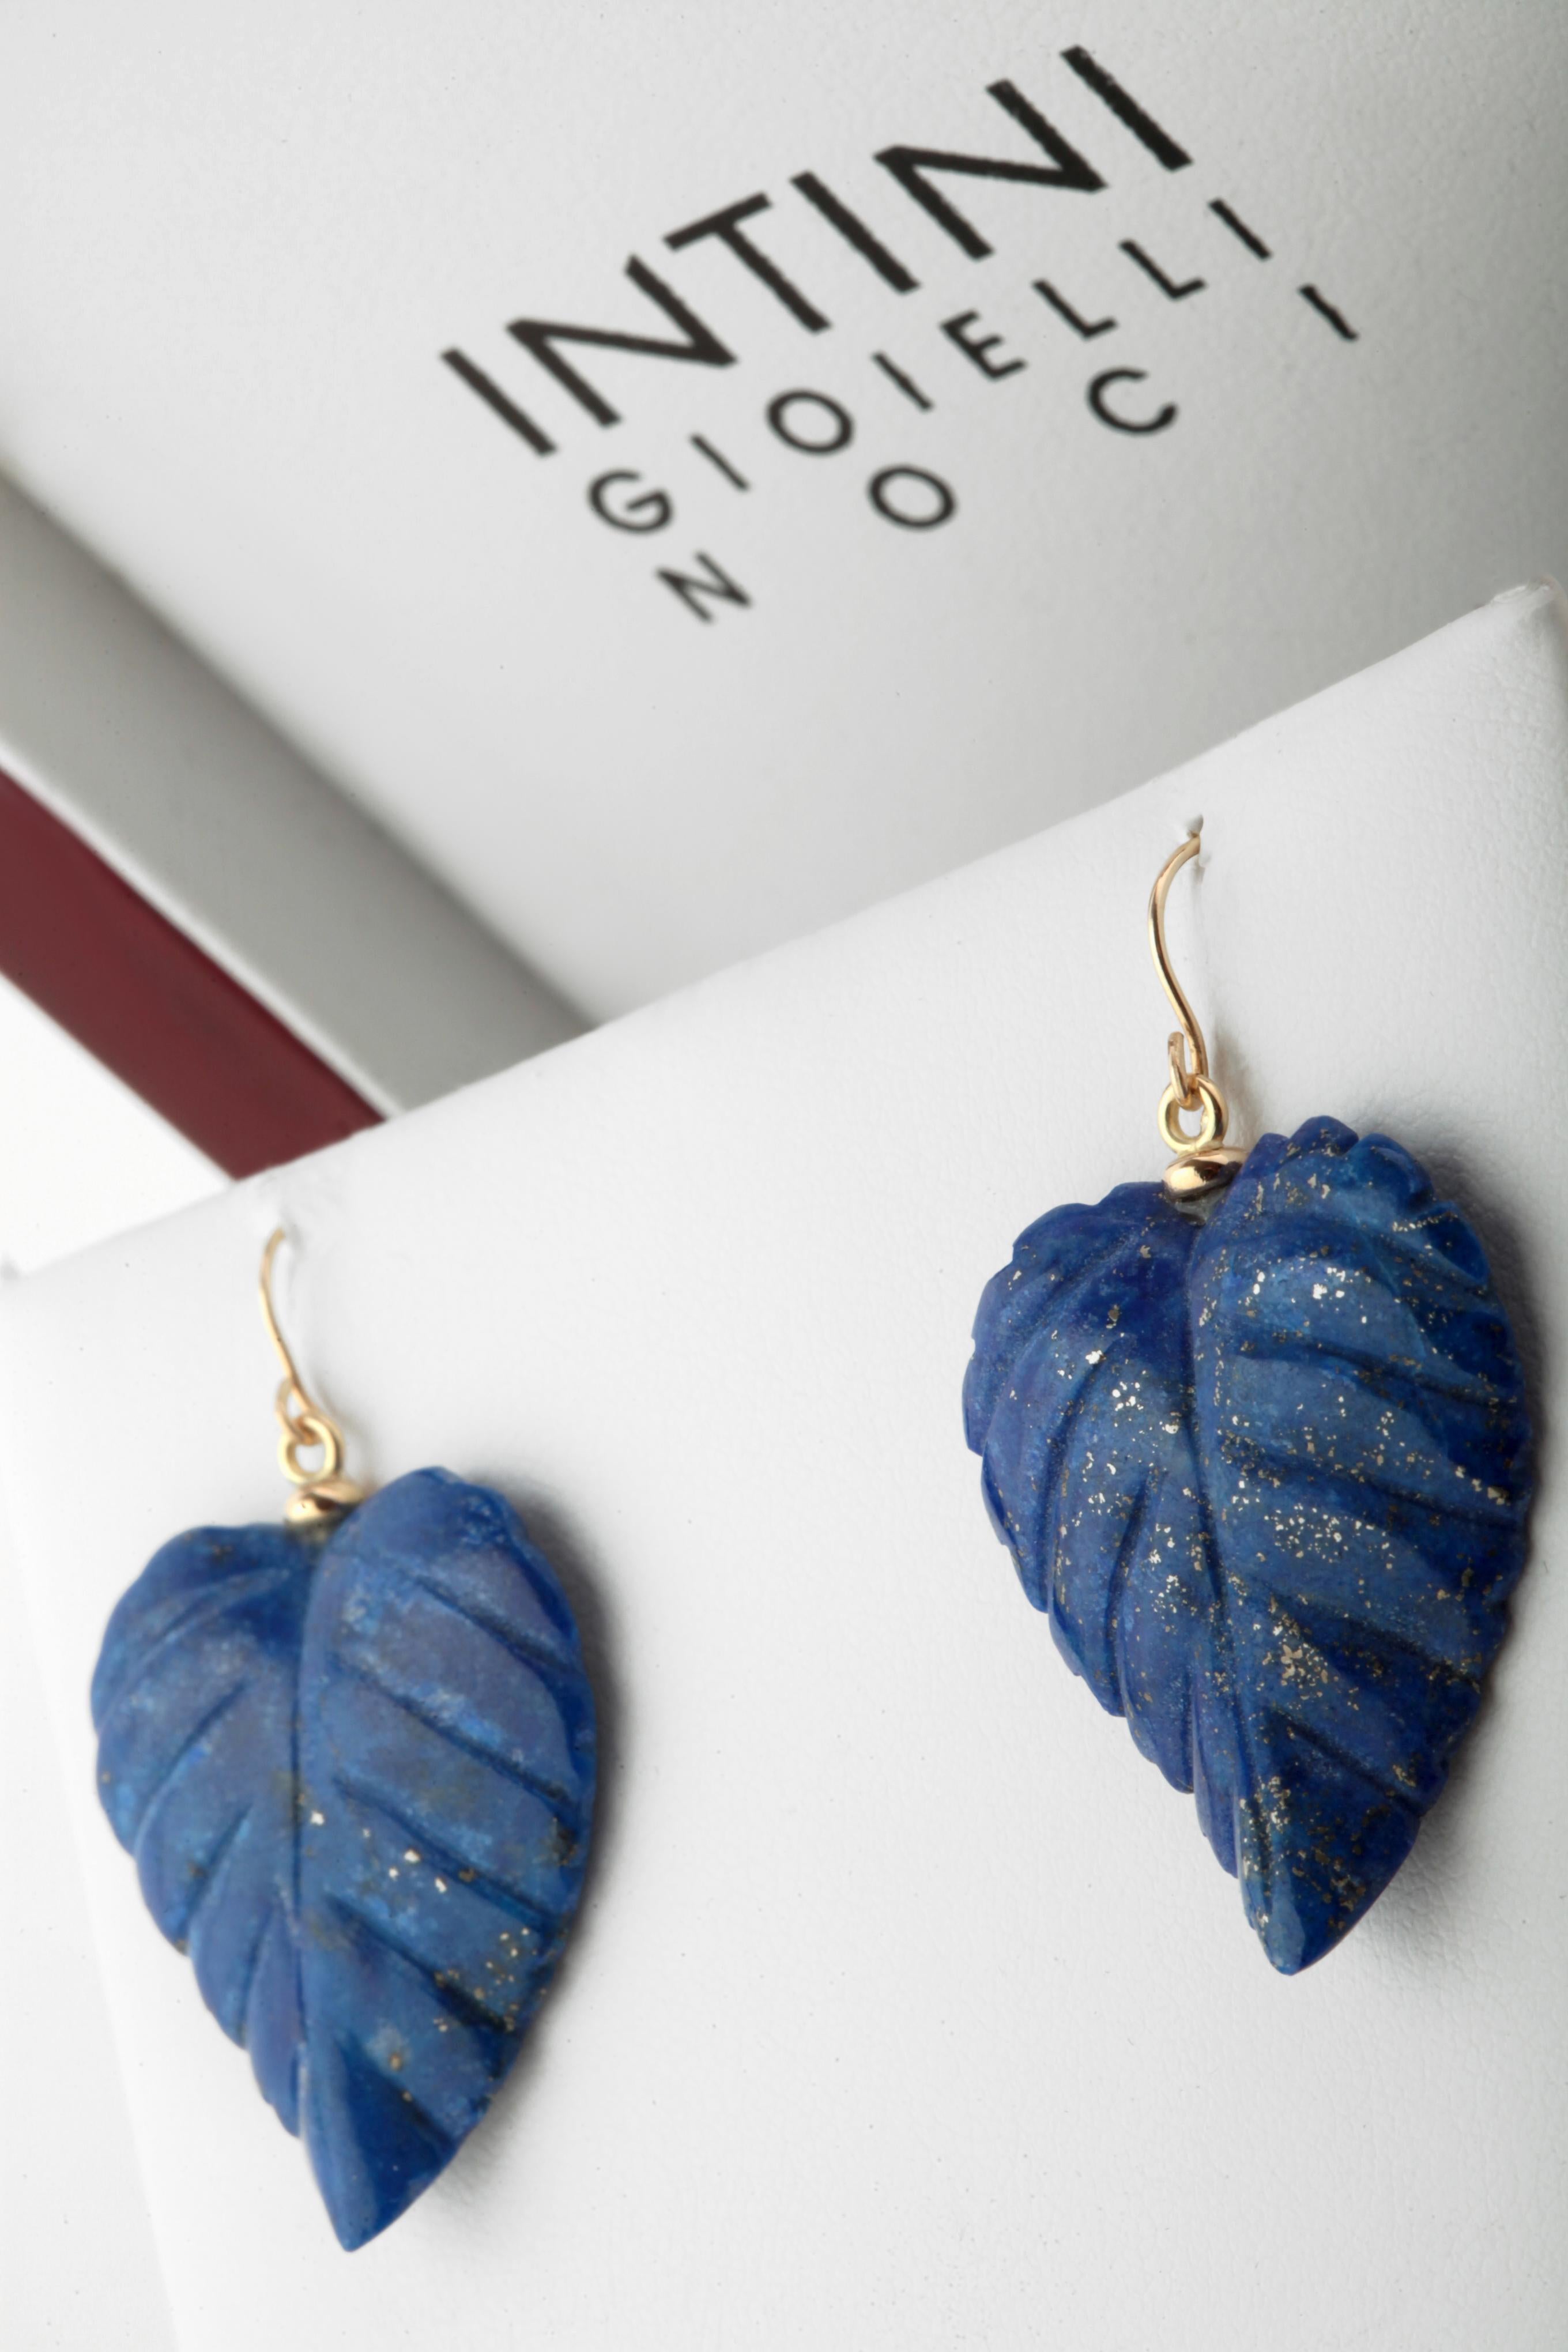 This stunning masterpiece with high quality craftsmanship was born in the Intini Jewels workshop. Our designers add all the italian modern style and glamour in one exquisite piece. Stunning crafted lapis lazuli leaves, hanging from 18 karat yellow